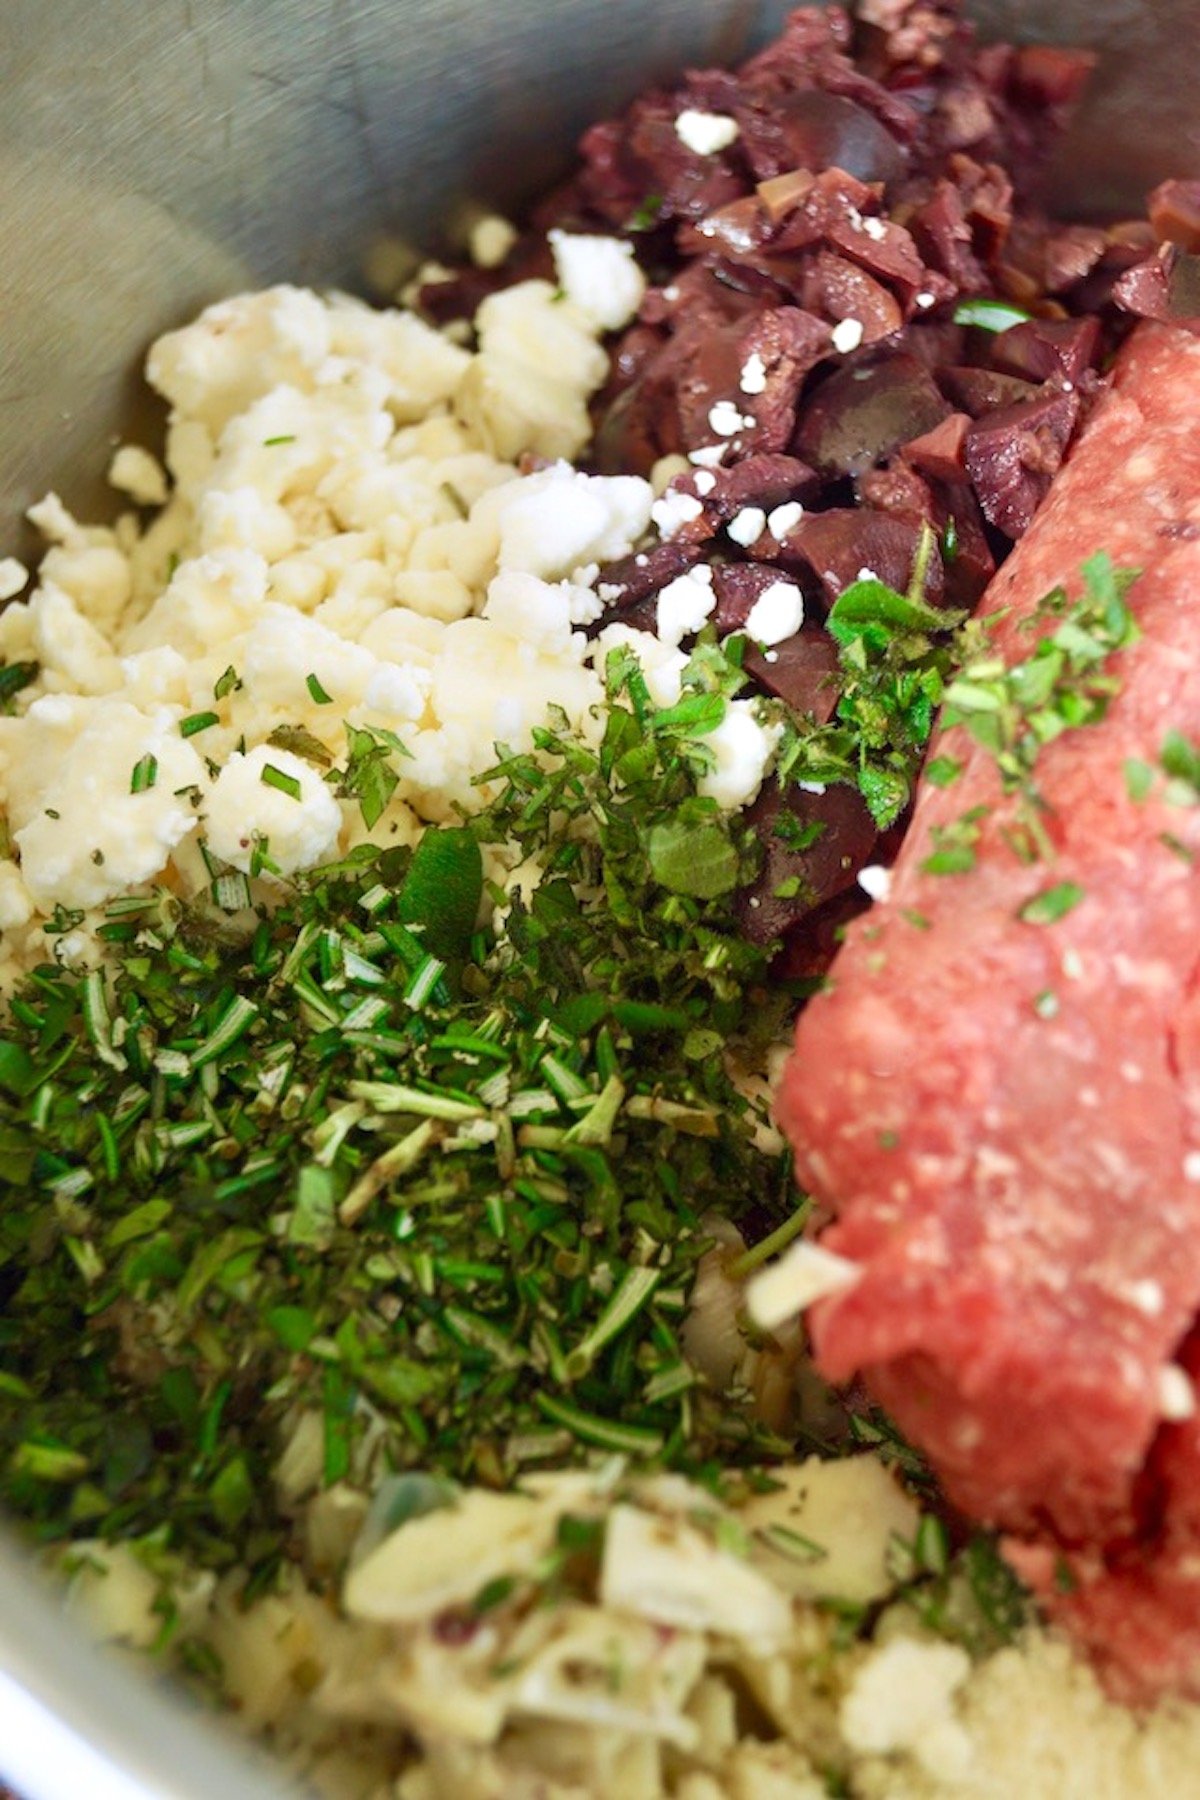 Bowl of ingredients for Grilled Mediterranean Burgers with chopped herbs on top.